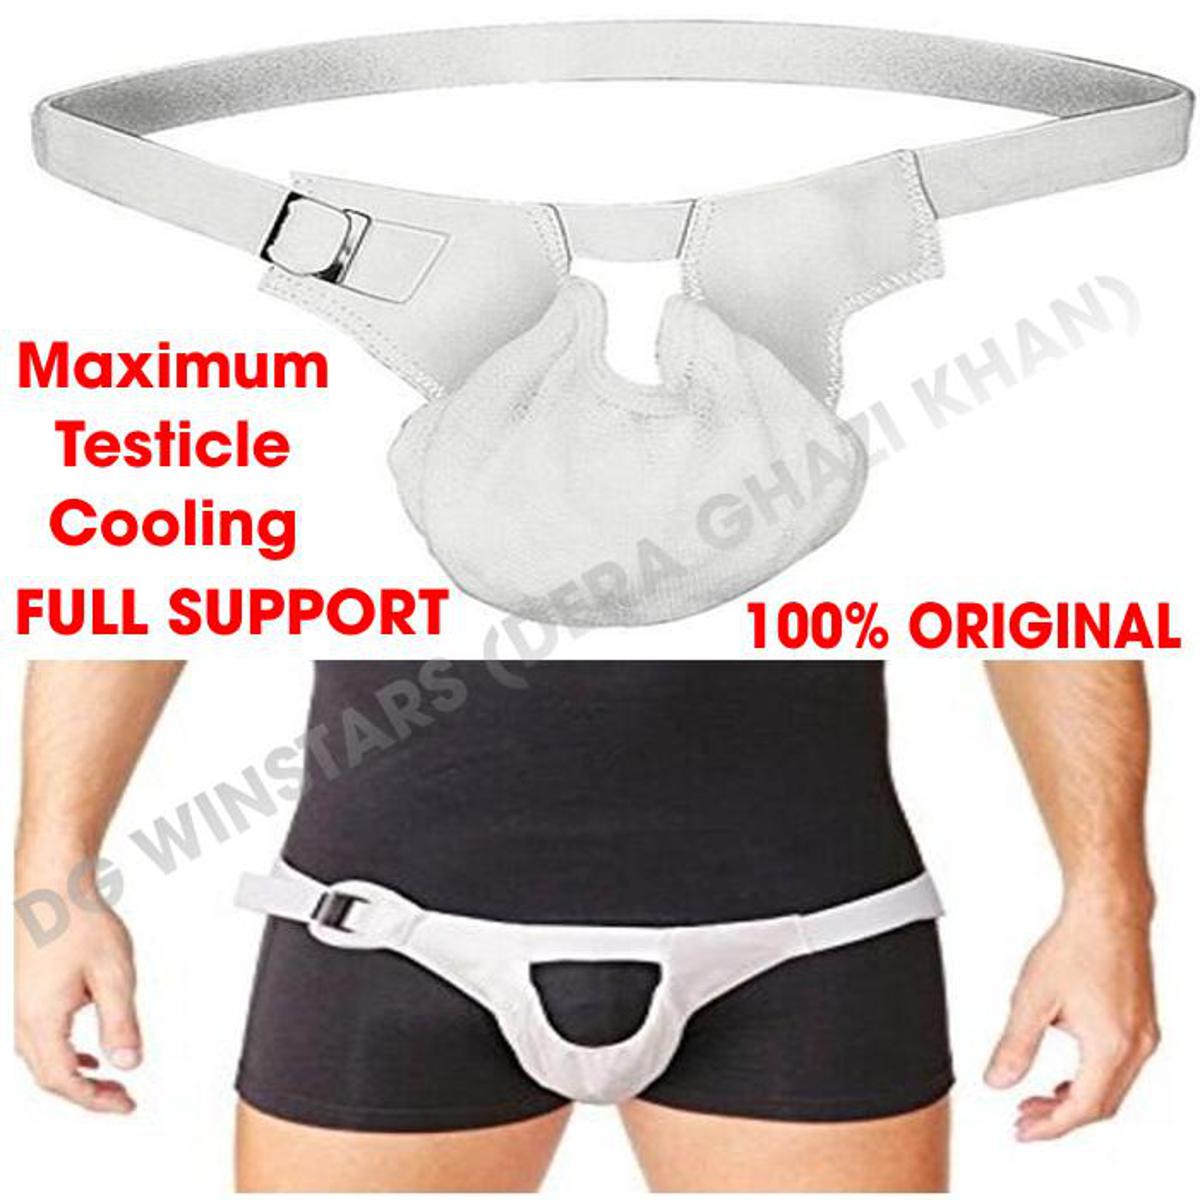 Brief Cotton Underwear Varicocele Below Suspensory Jockstrap For Scrotal  Testicle Hernia Support Belt Belt Maximum Testicle Cooling For Men That  Want Stylish Underwear With All-Day Comfort And Support - Stay Comfy And